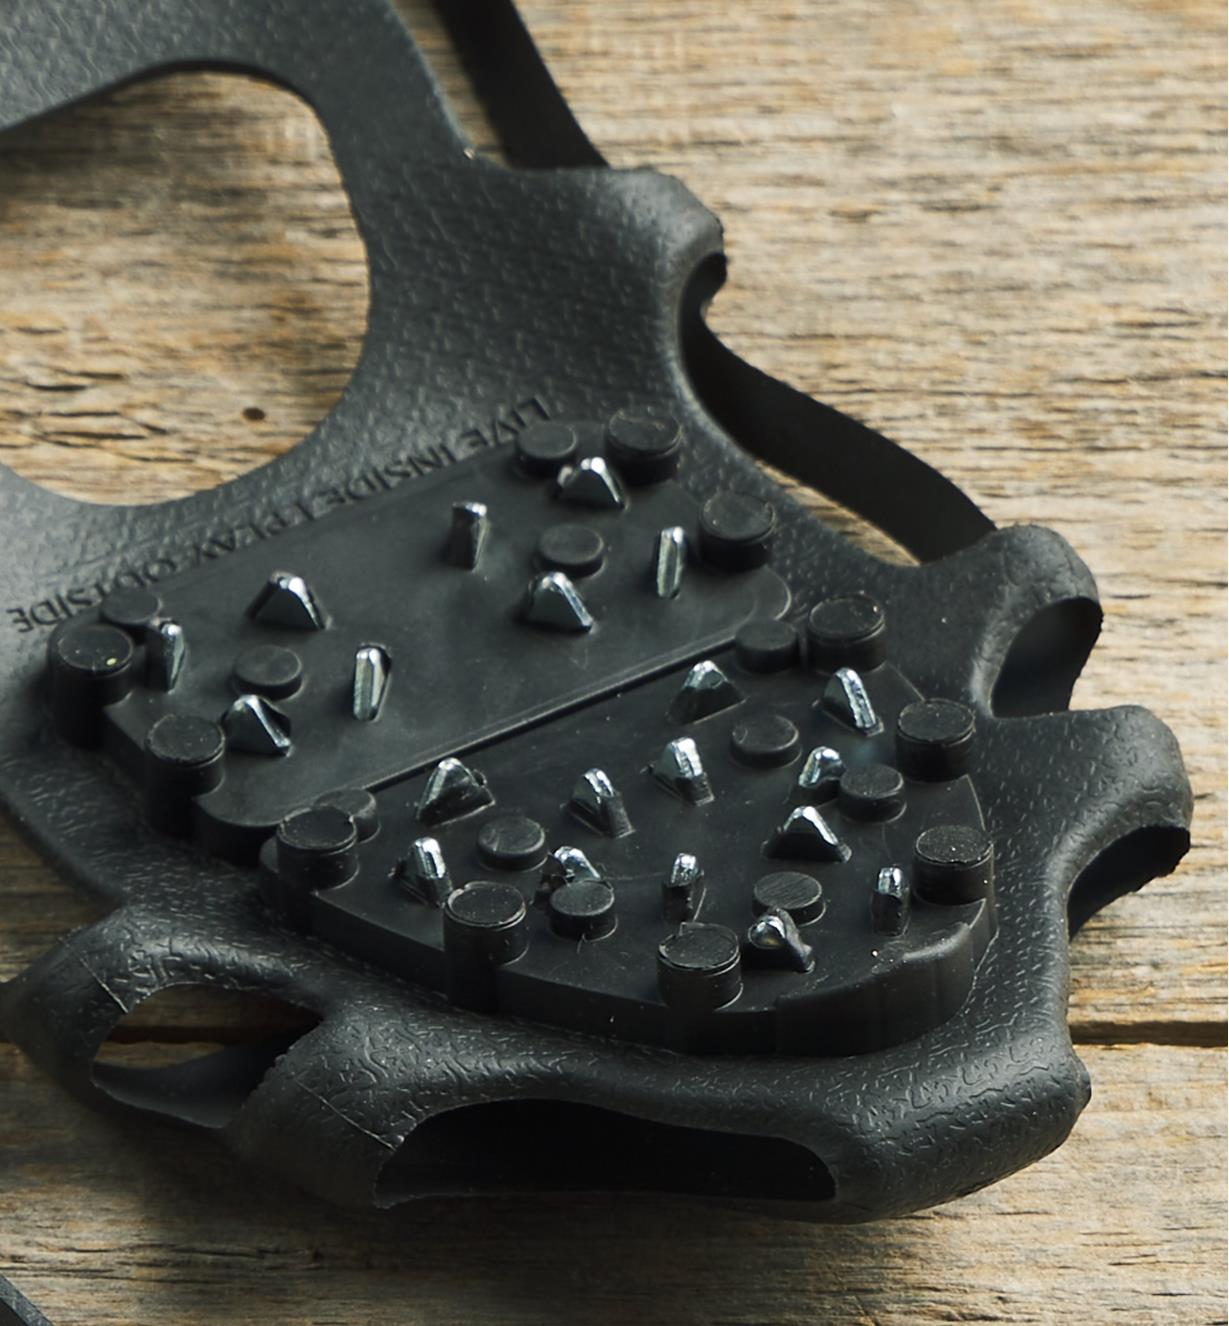 A close-up view of the bidirectional steel ice cleats